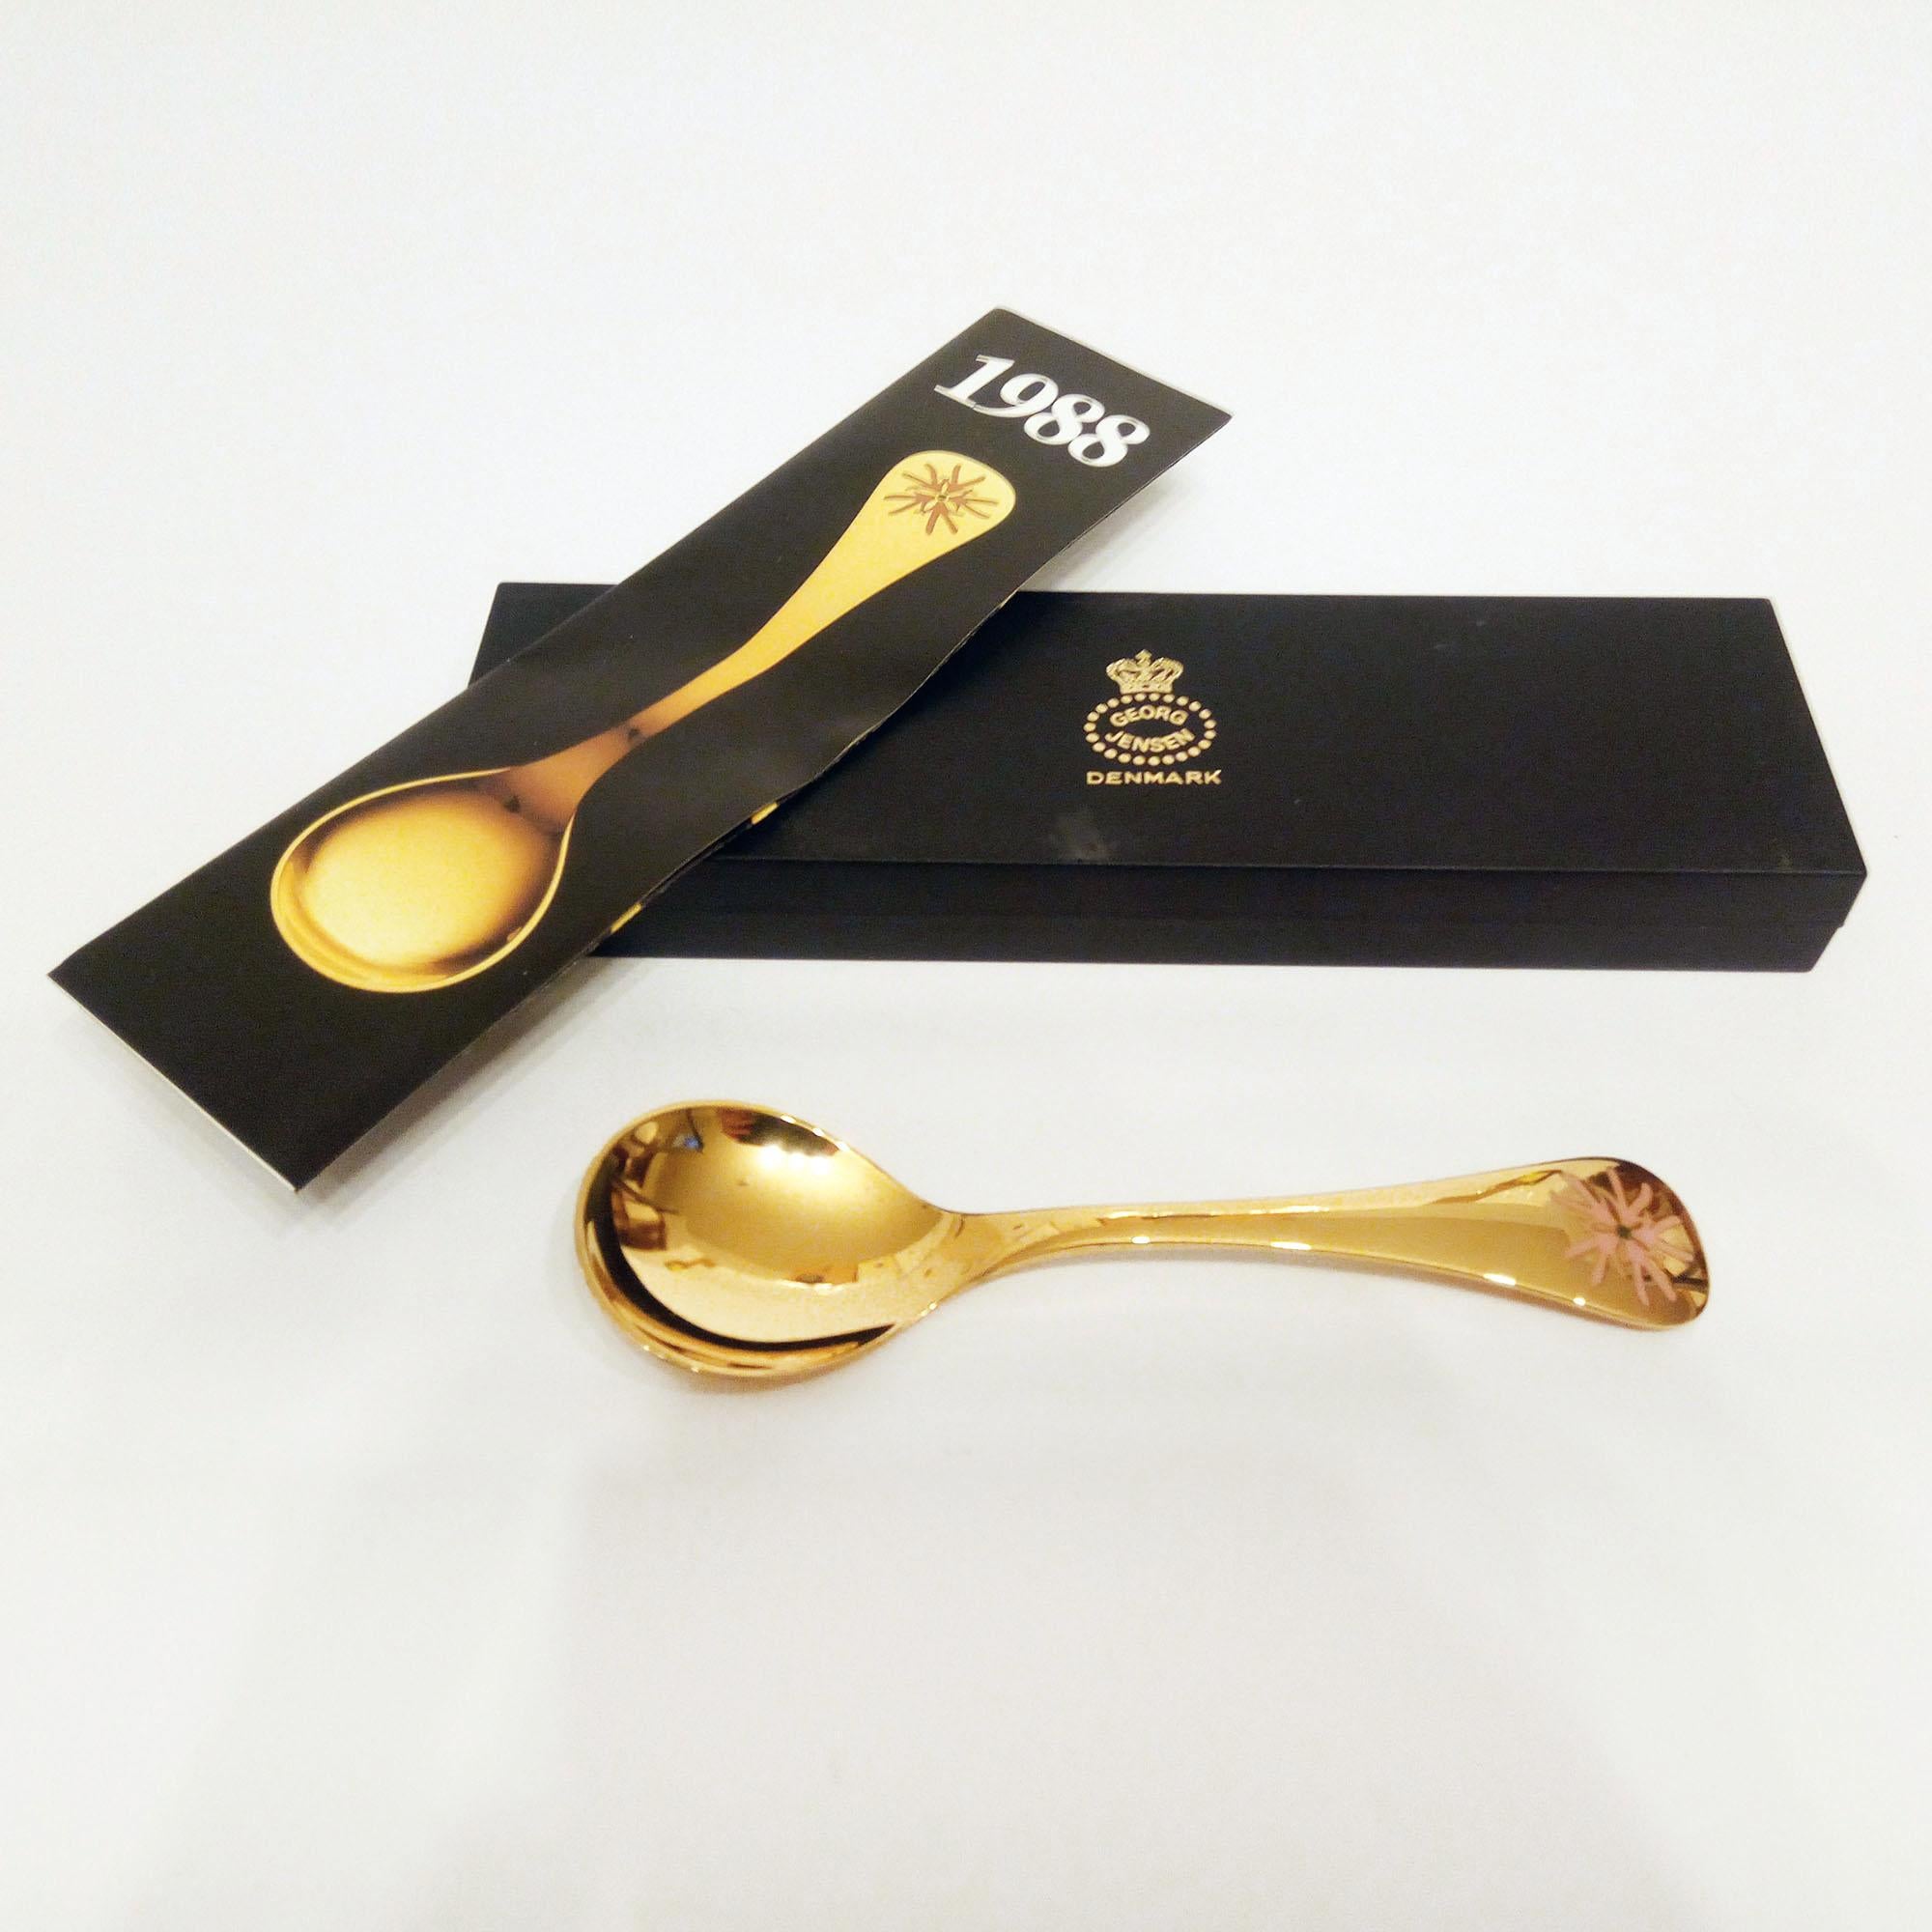 Annual Spoon 1988 in original box, designed by Annelise Björner, edited by Georg Jensen.
Annual Spoons series began in 1971. Each spoon is crafted in sterling silver, then gold plated and enameled with a wildflower chosen for that year. The 1988